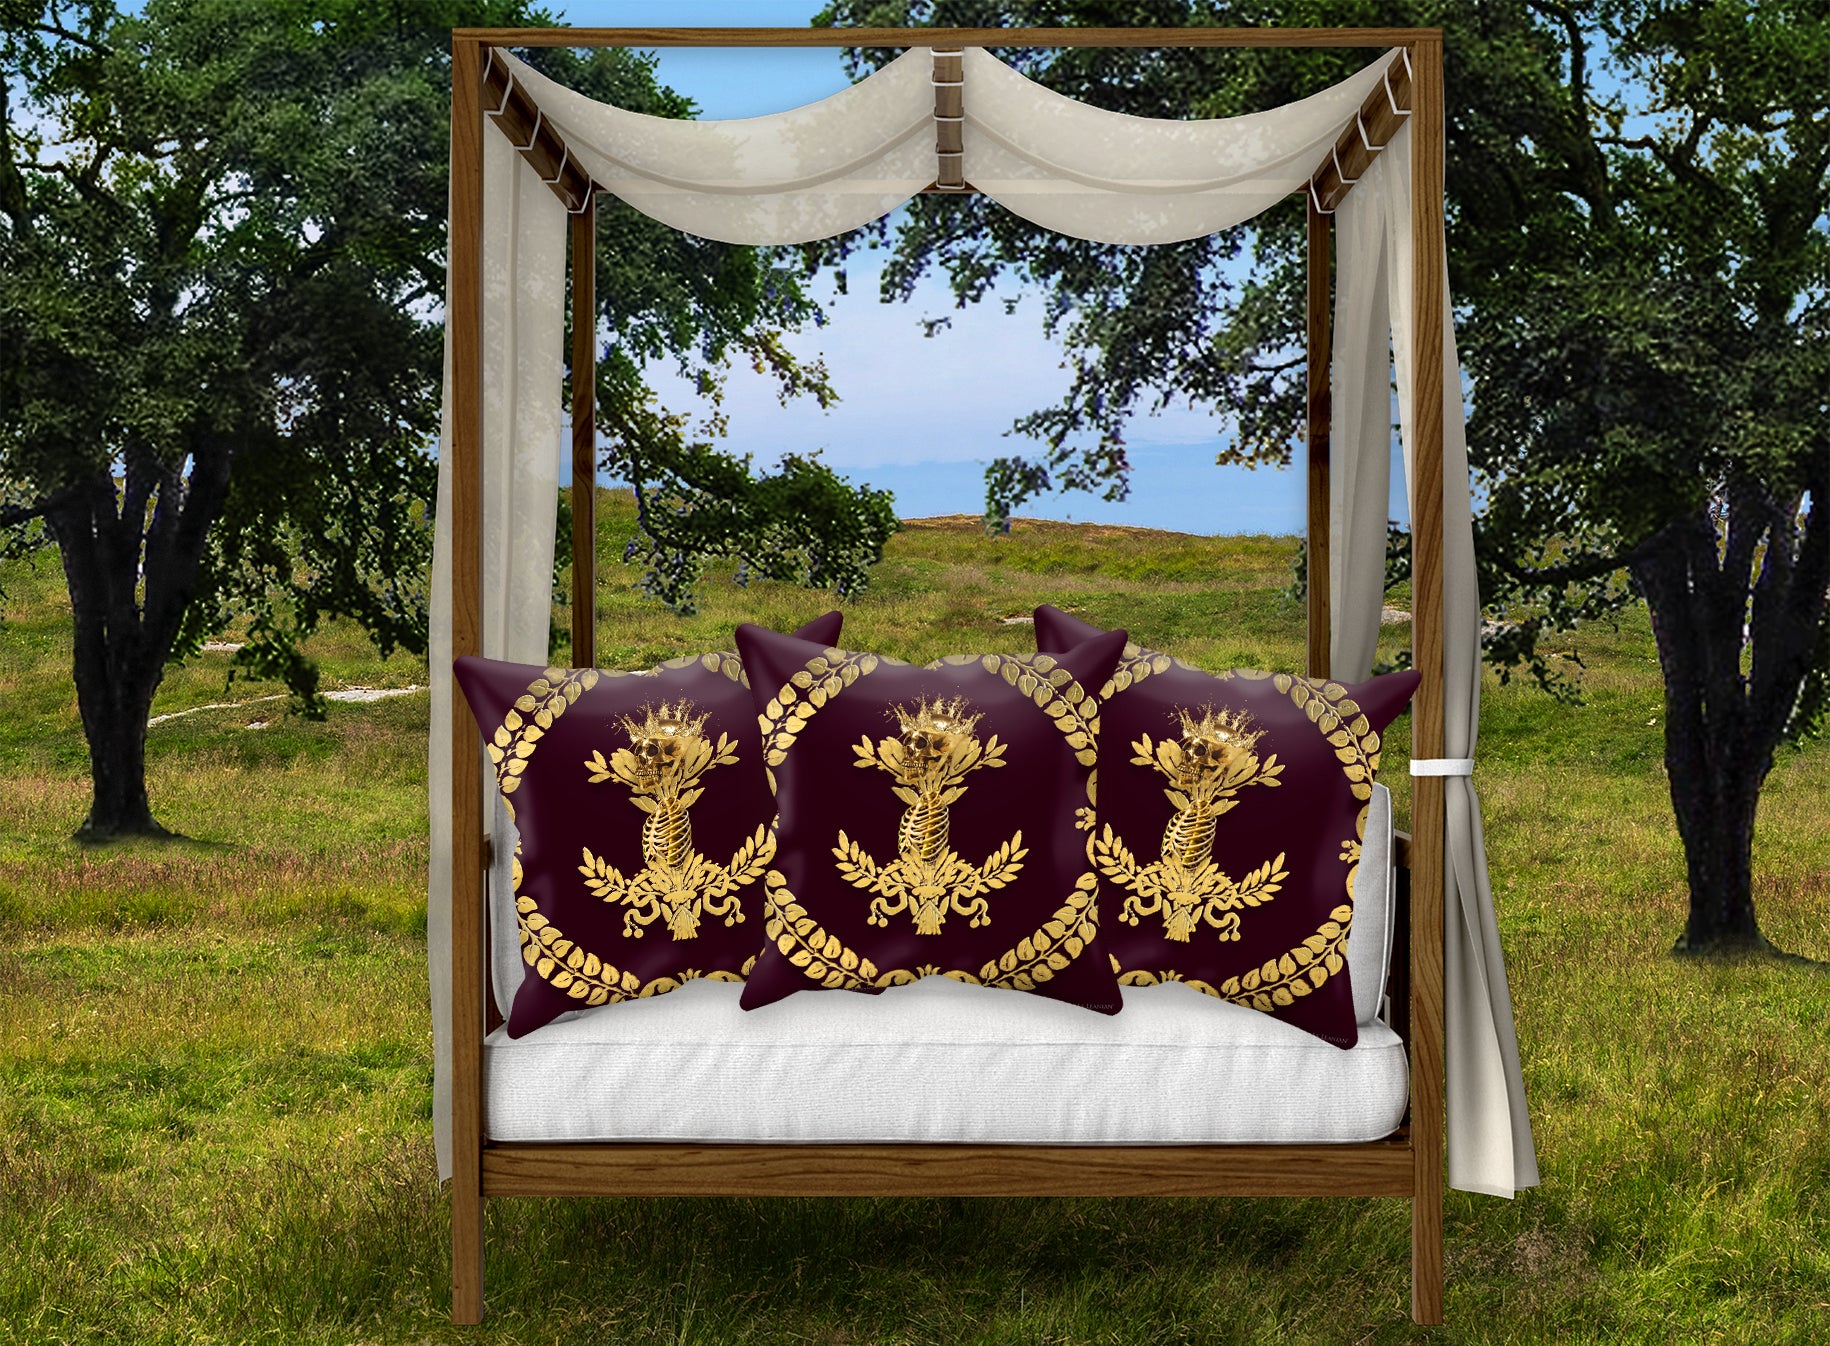 Satin & Suede Pillow Case-Cushion Cover-Gold WREATH-GOLD SKULL- Color EGGPLANT WINE, WINE RED, BURGUNDY, PURPLE